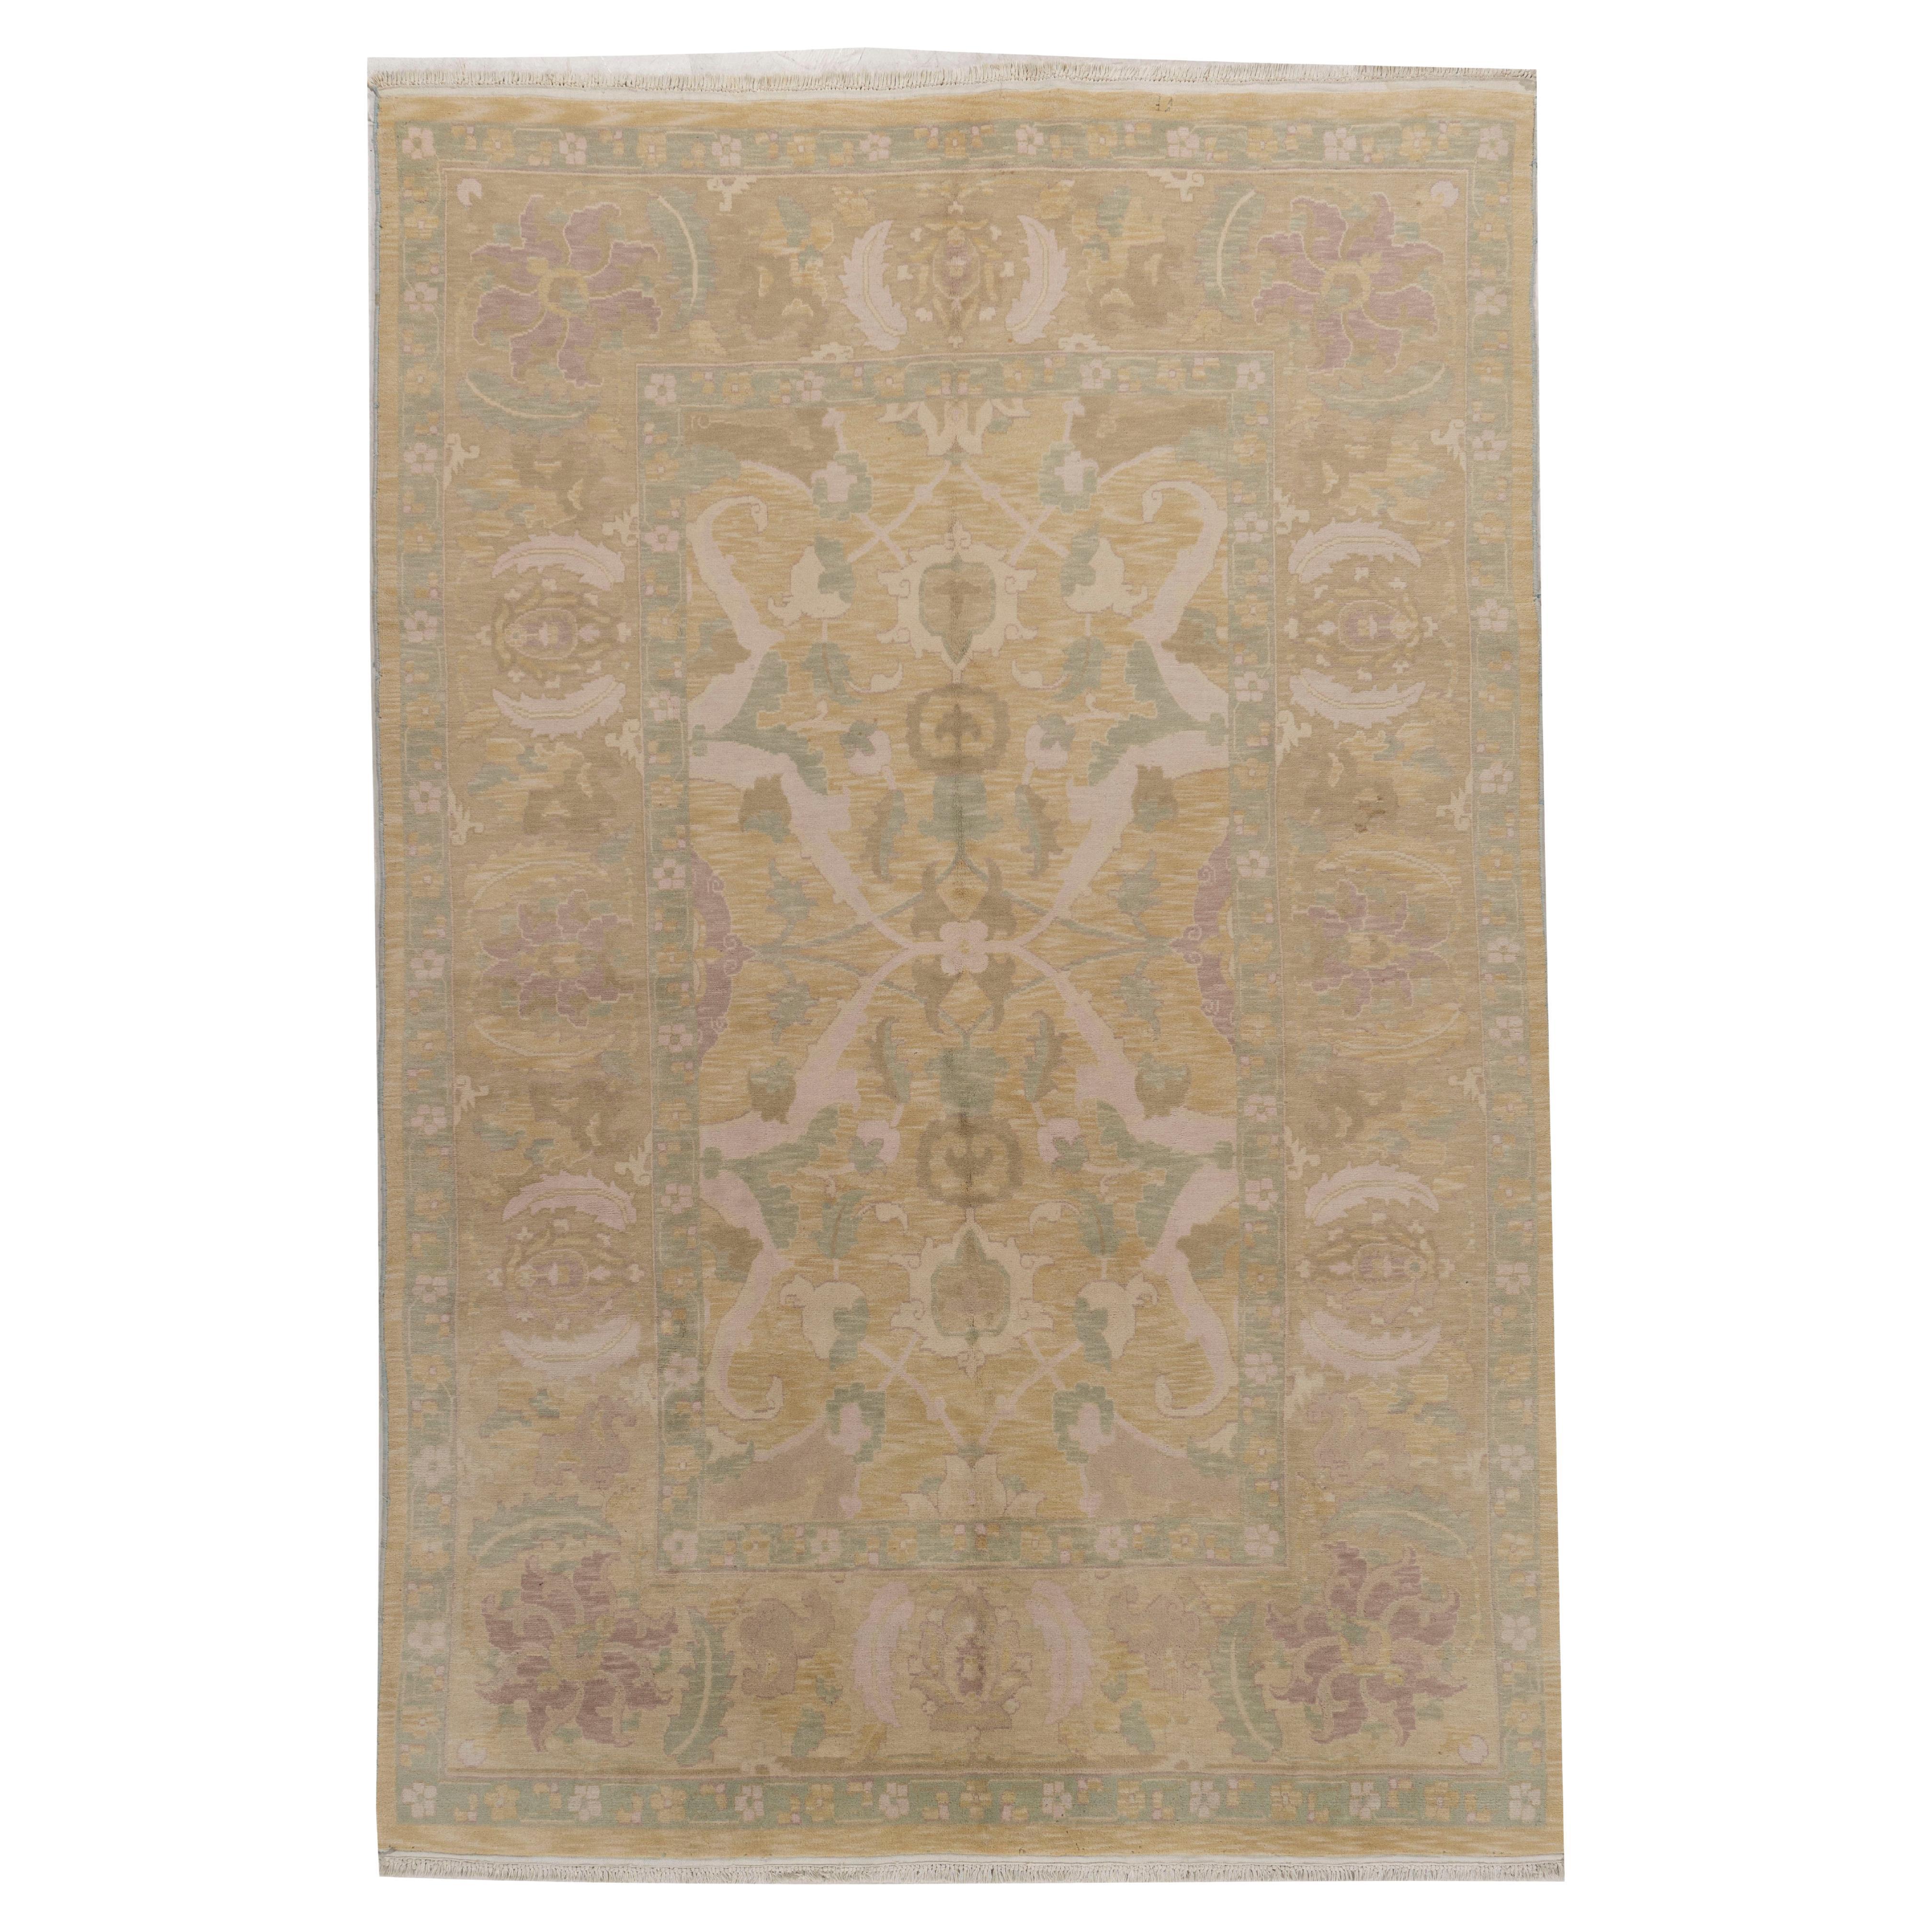 Agra Design Rug 6'4 X 9'9. A hand knotted wool Indian Agra design rug circa 2000.